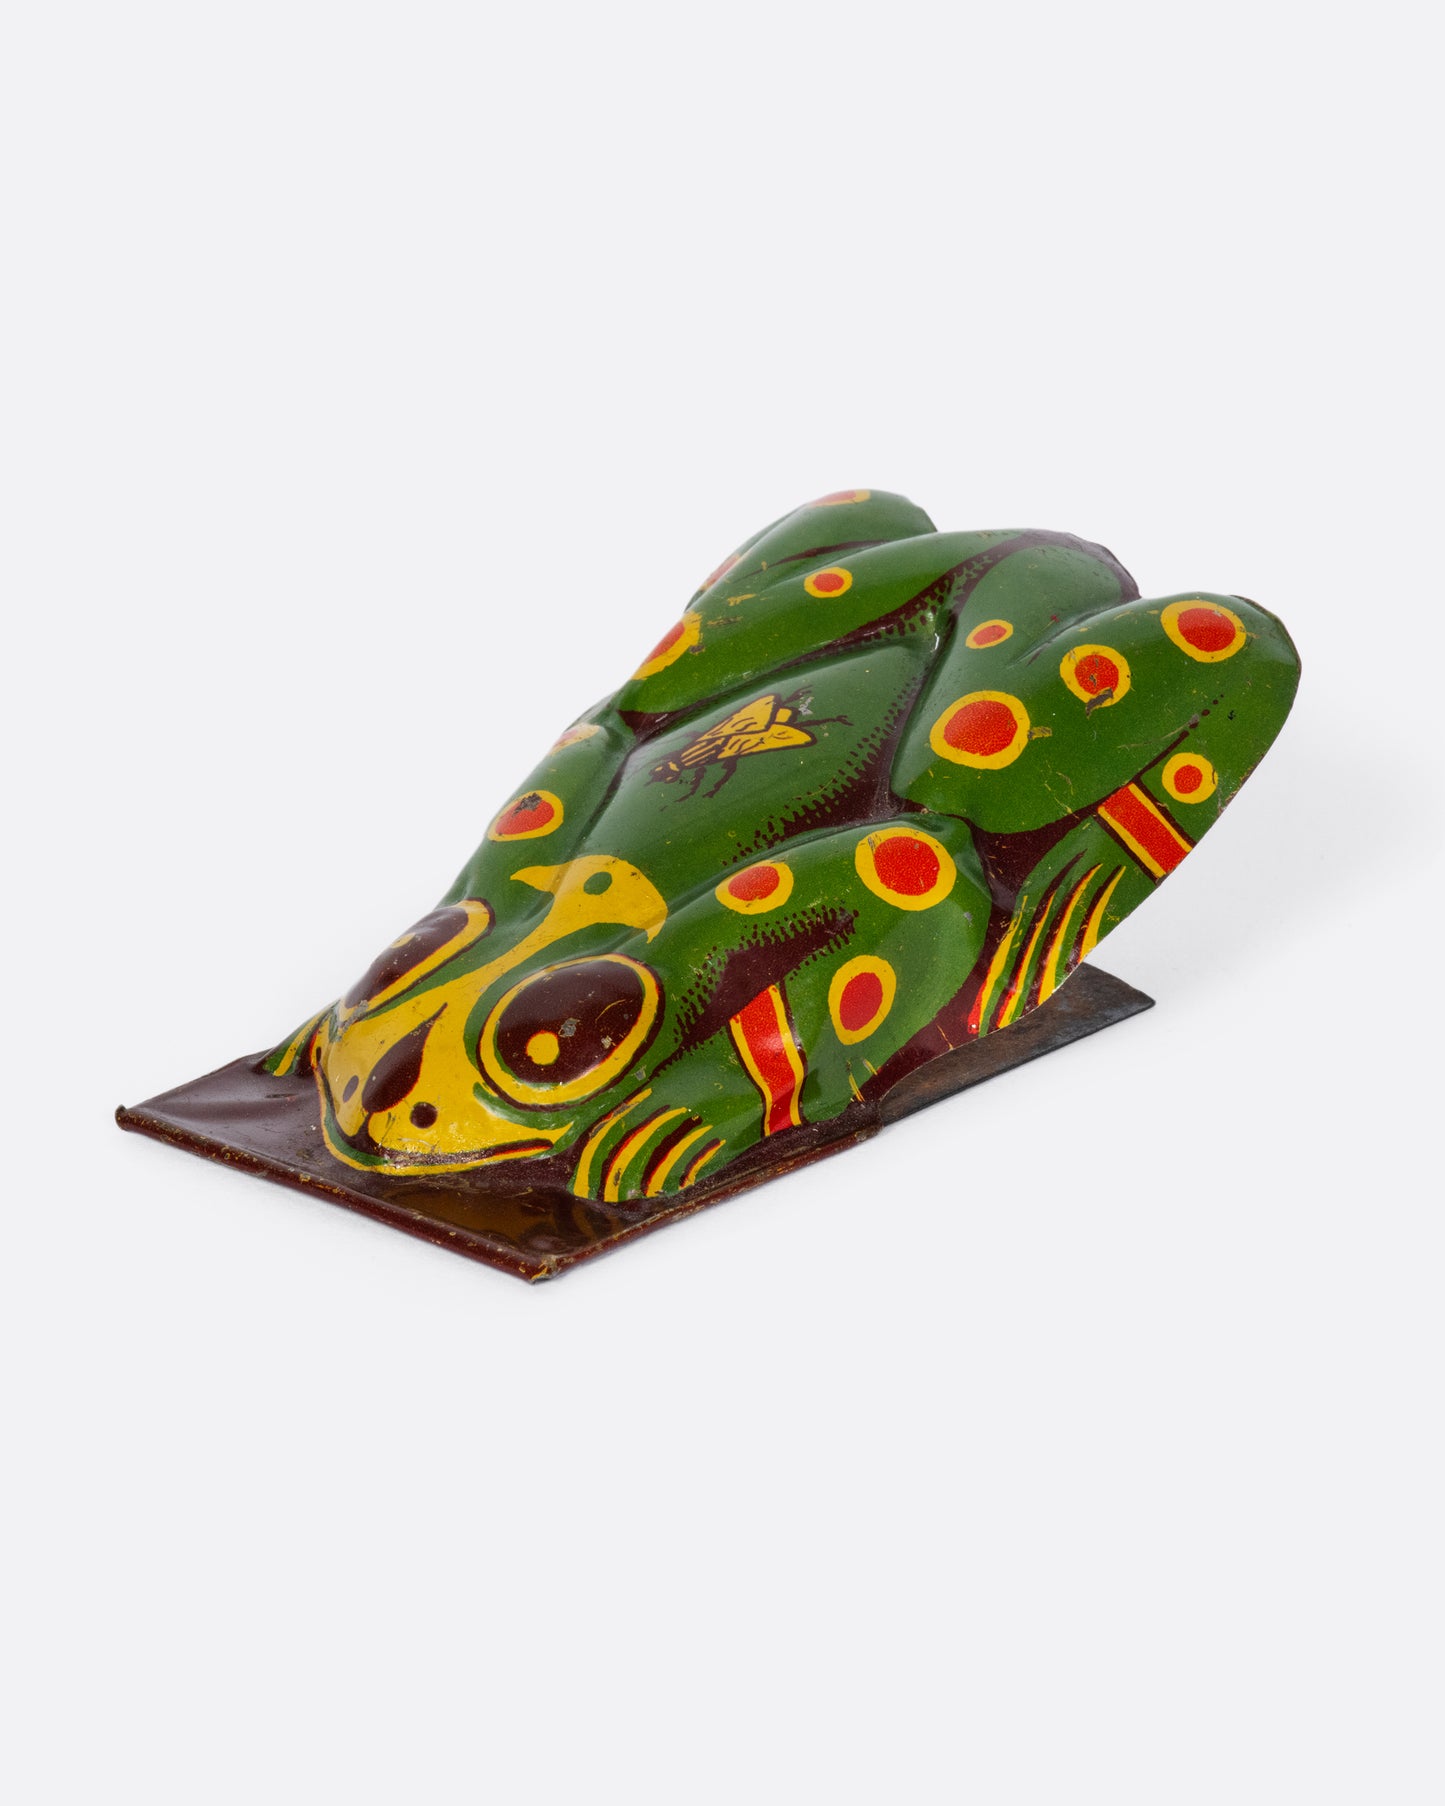 This vibrant, vintage frog clicker makes a loud clicking sound when pressed, making it a cute and effective tool for training your dog.